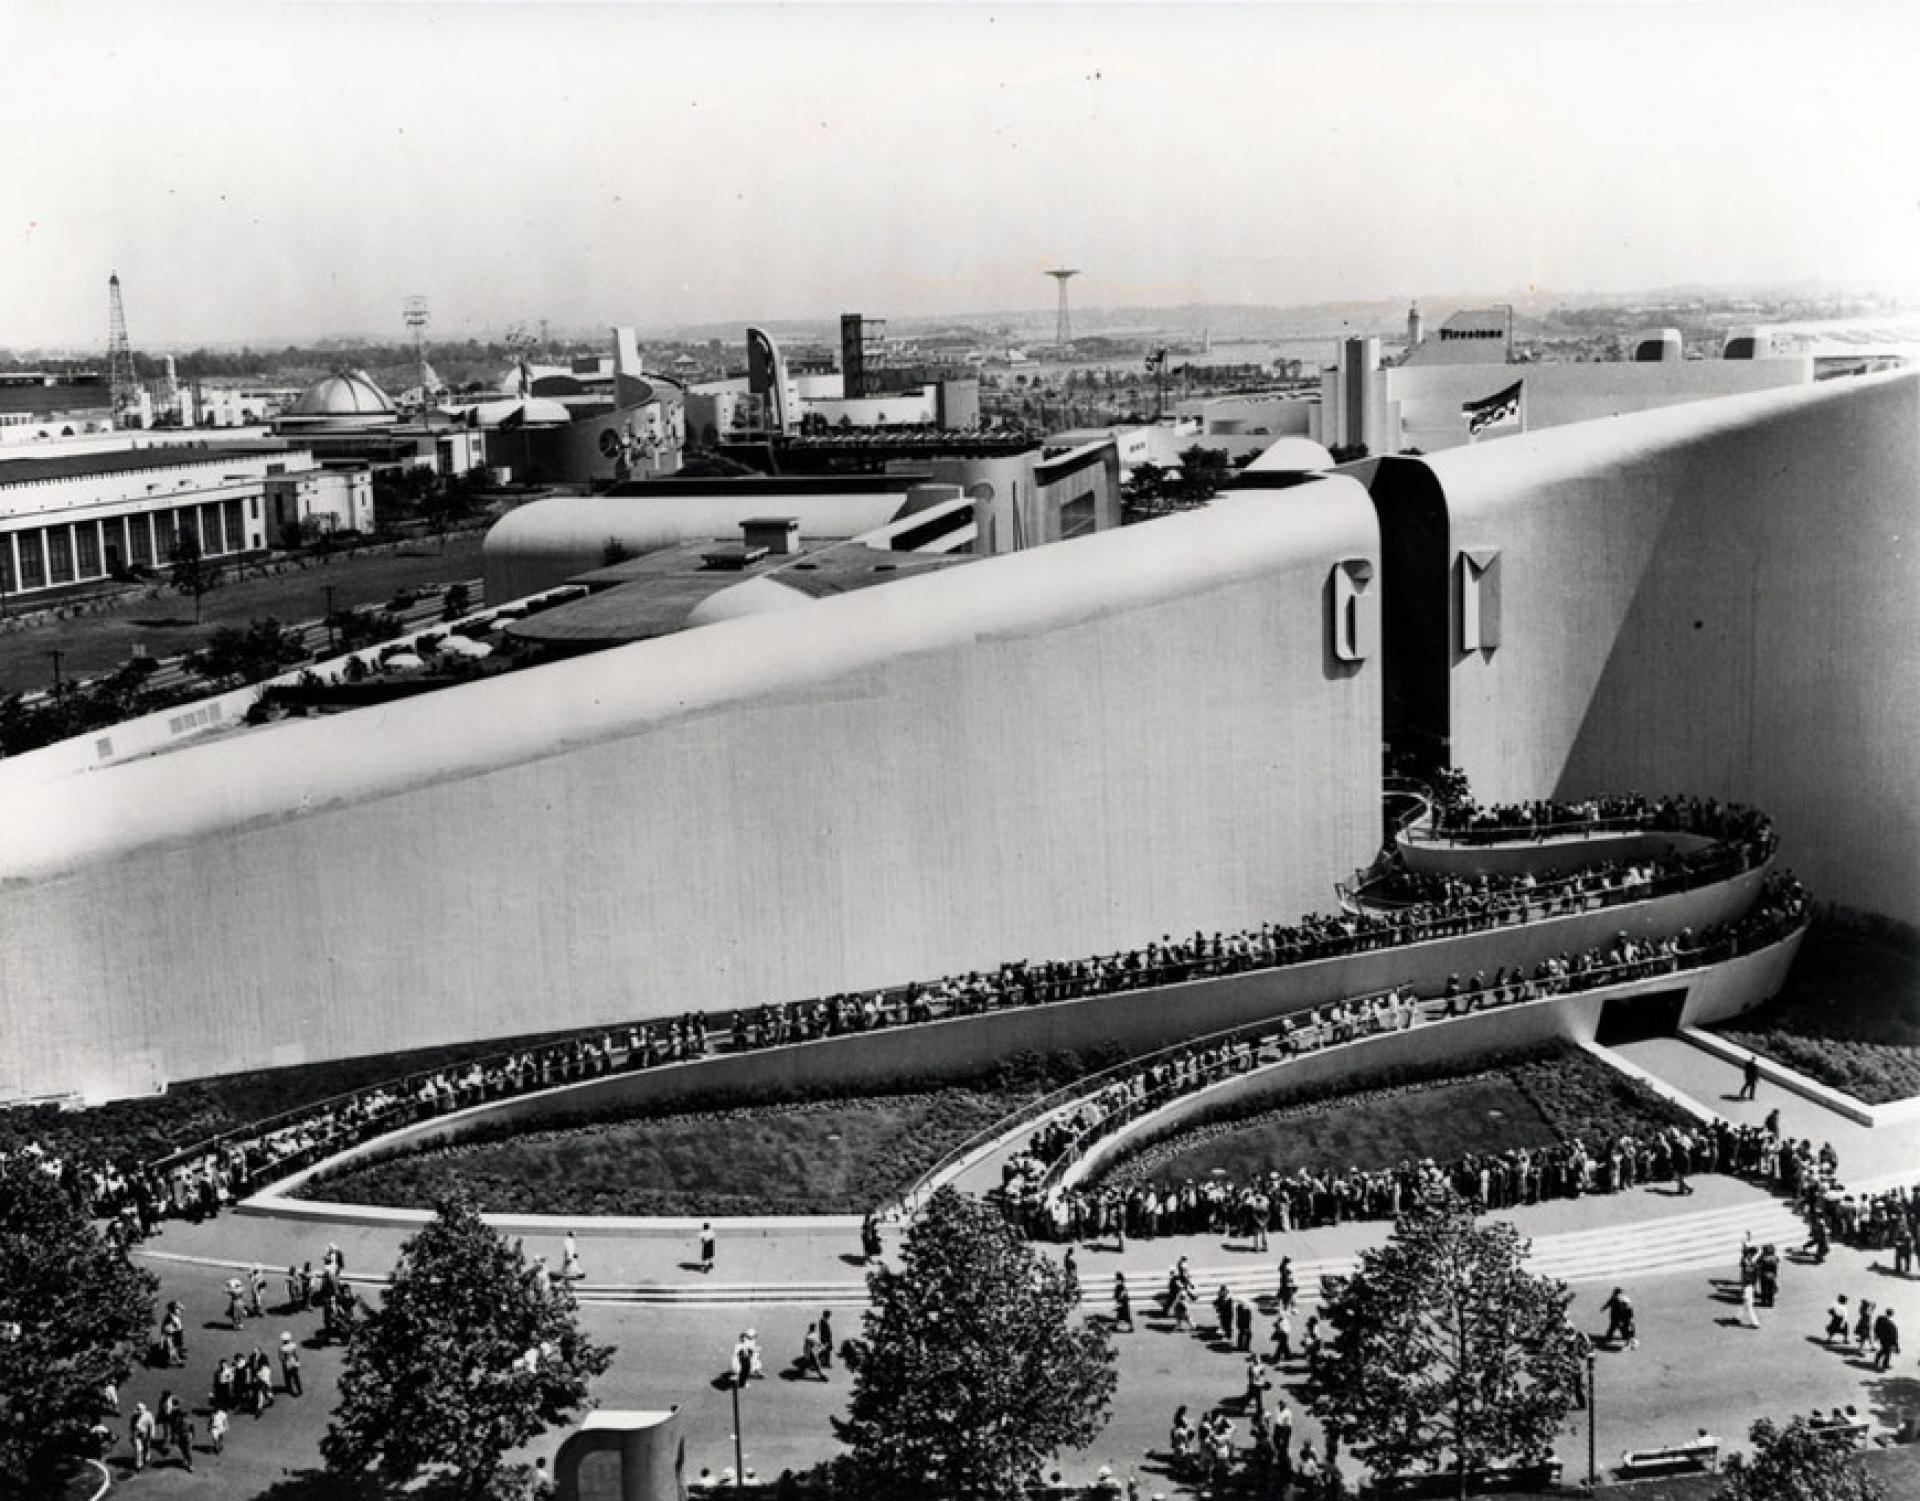 Futurama, General Motors pavilion for the New York World’s Fair in 1939. | Photo courtesy the National Building Museum